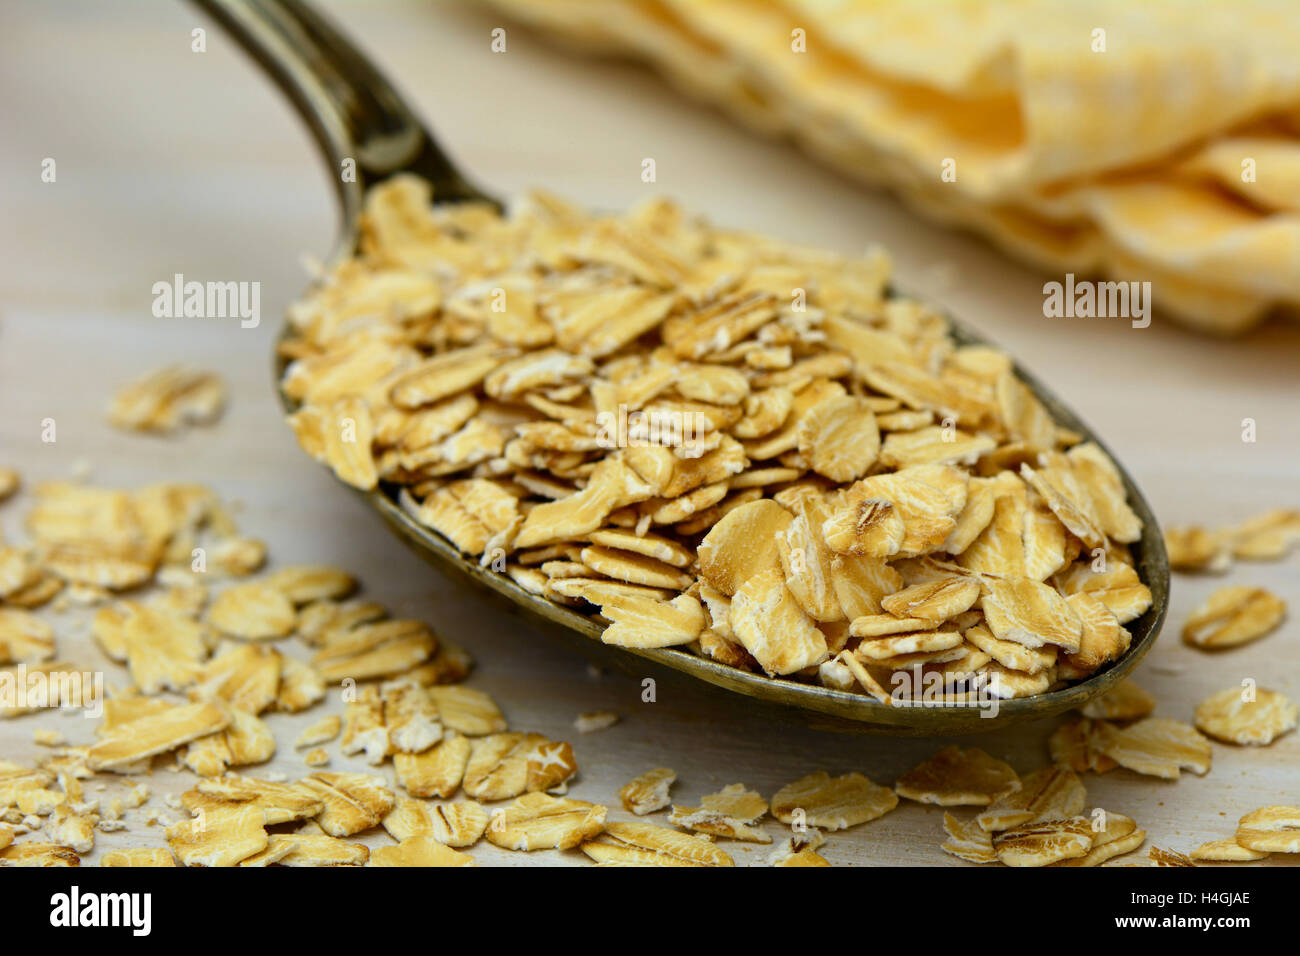 Old fashioned whole grain rolled oats with vintage silver spoon on rustic wood with yellow napkin in background.  Shallow depth Stock Photo